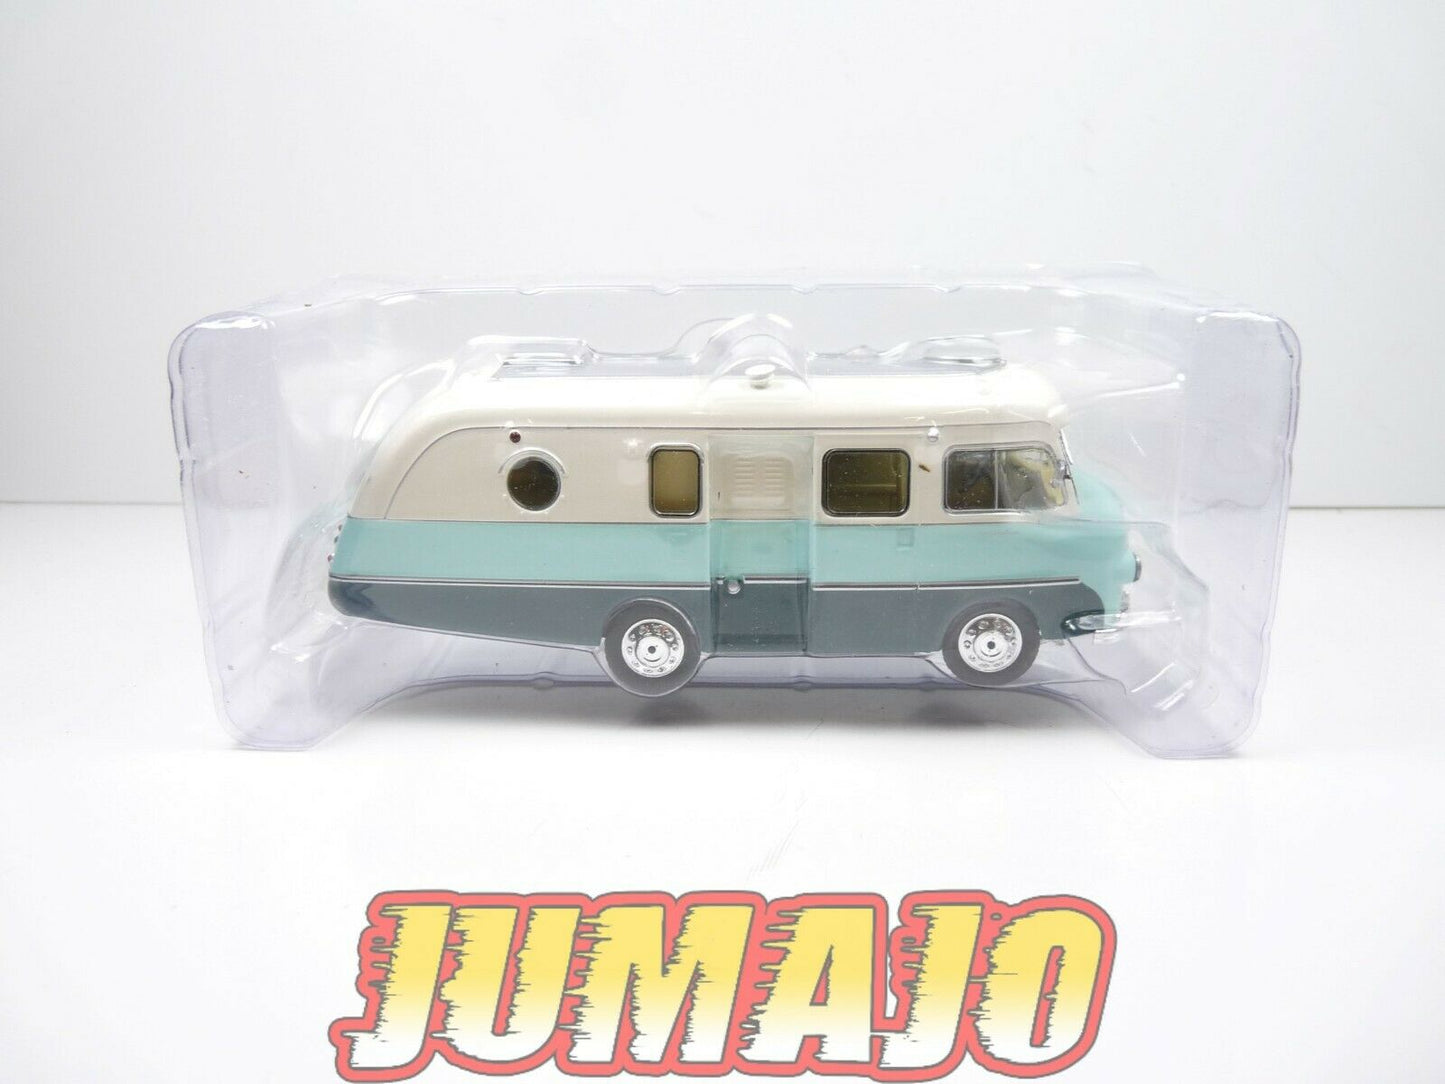 CCE203  1/43 camping cars hachettes : Citroën type H coccinelle III Le Bastard 1954